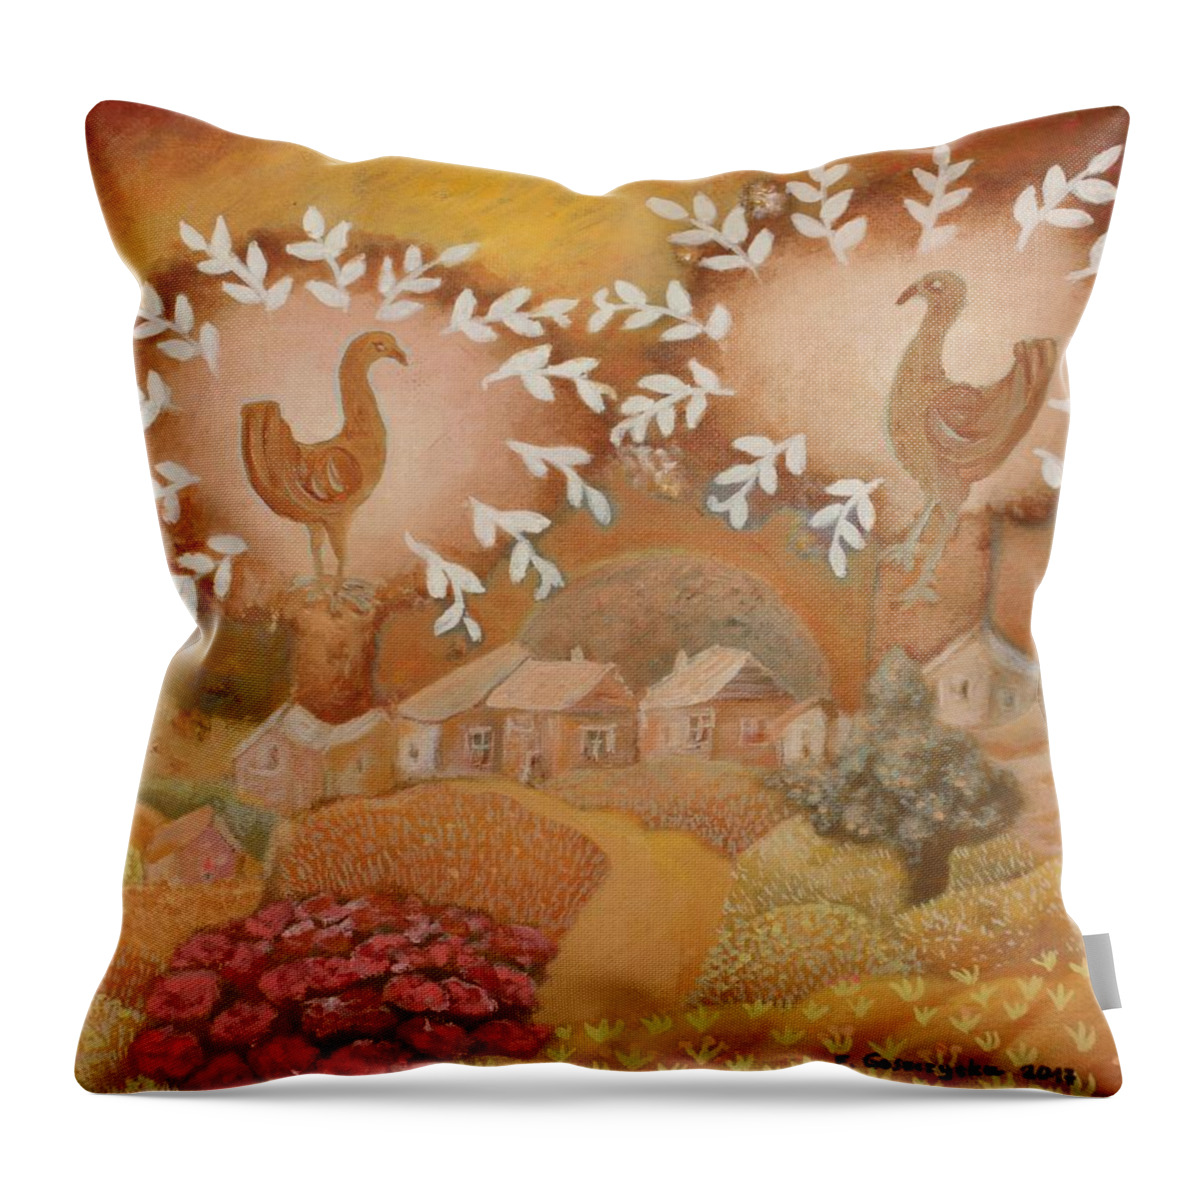 Slow Life Throw Pillow featuring the painting Slow life by Elzbieta Goszczycka